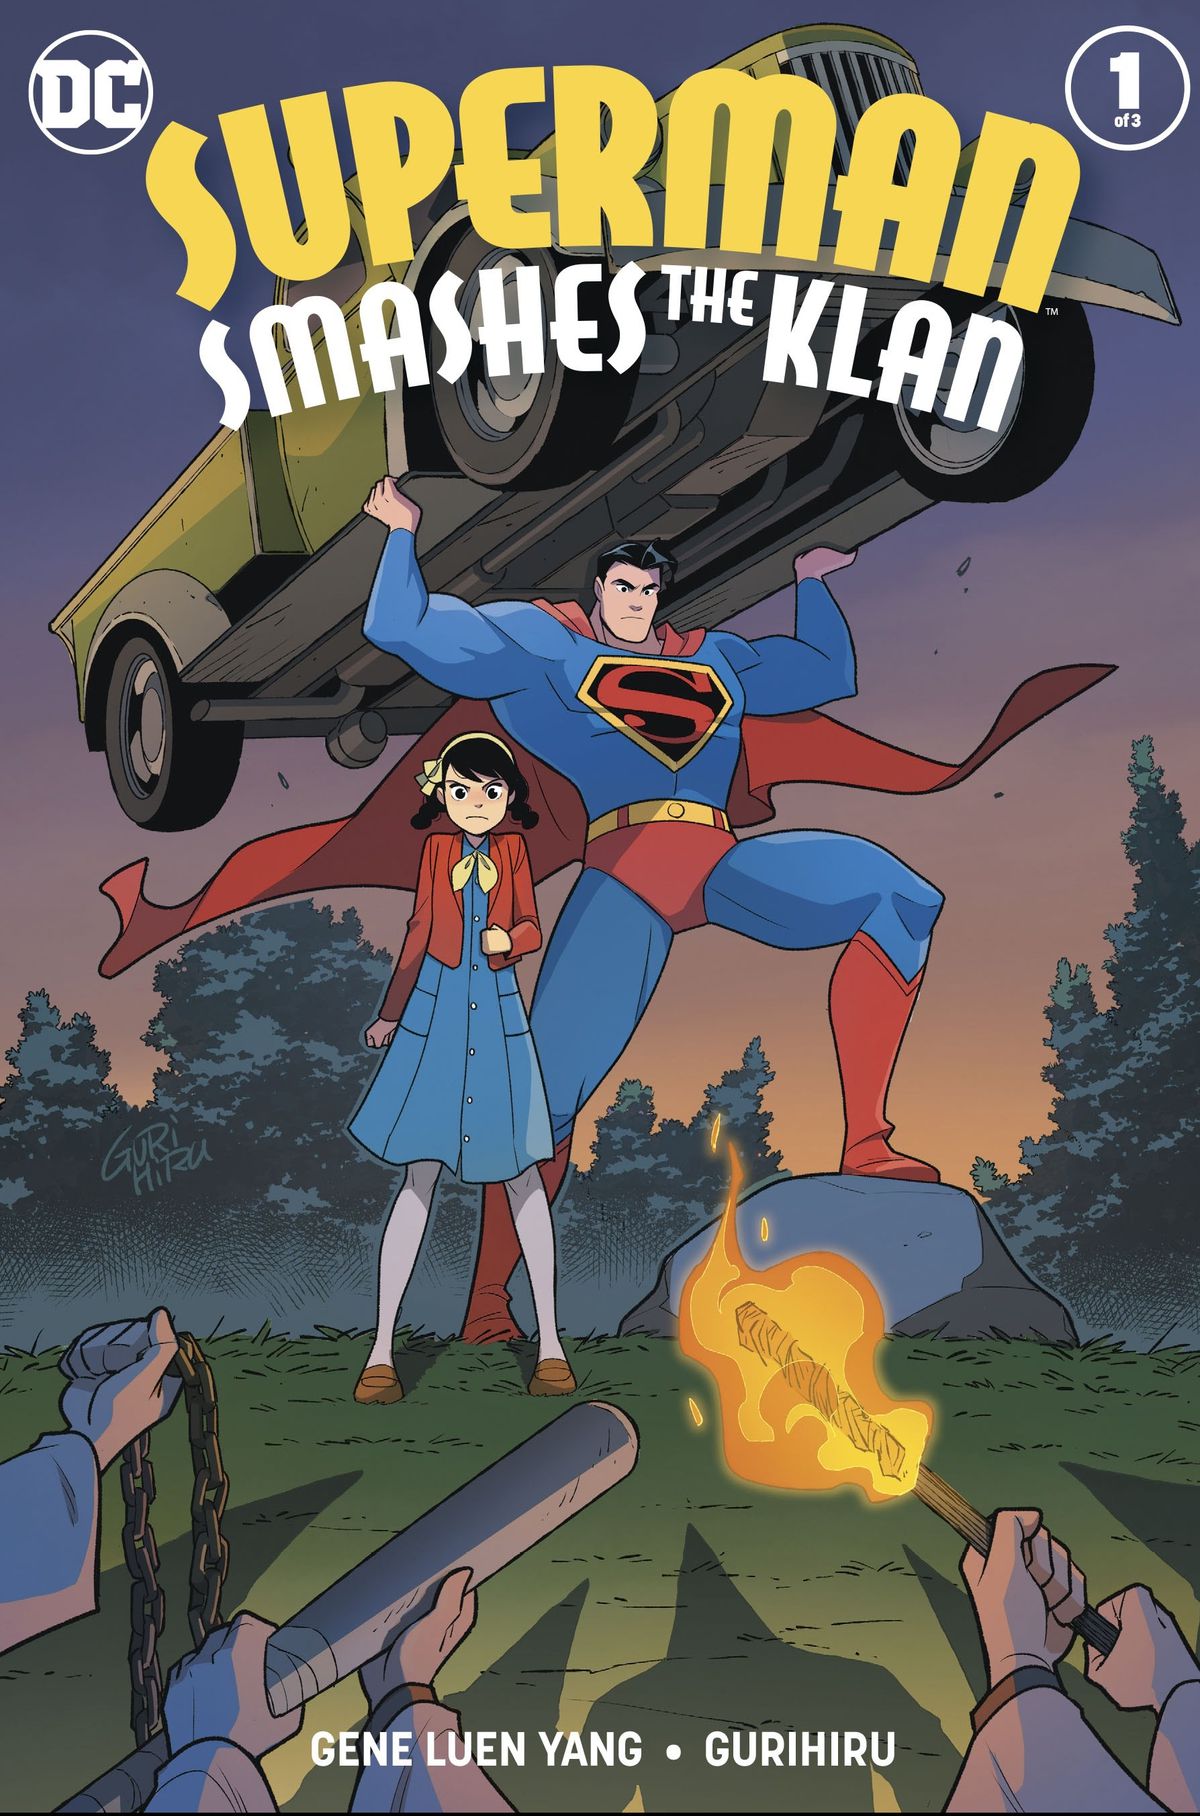 Superman hefts a car to throw at torch, chain, and bat-wielding enemies, alongside a young girl in a red jacket, on the cover of Superman Smashes the Klan #1, DC Comics (2019). 